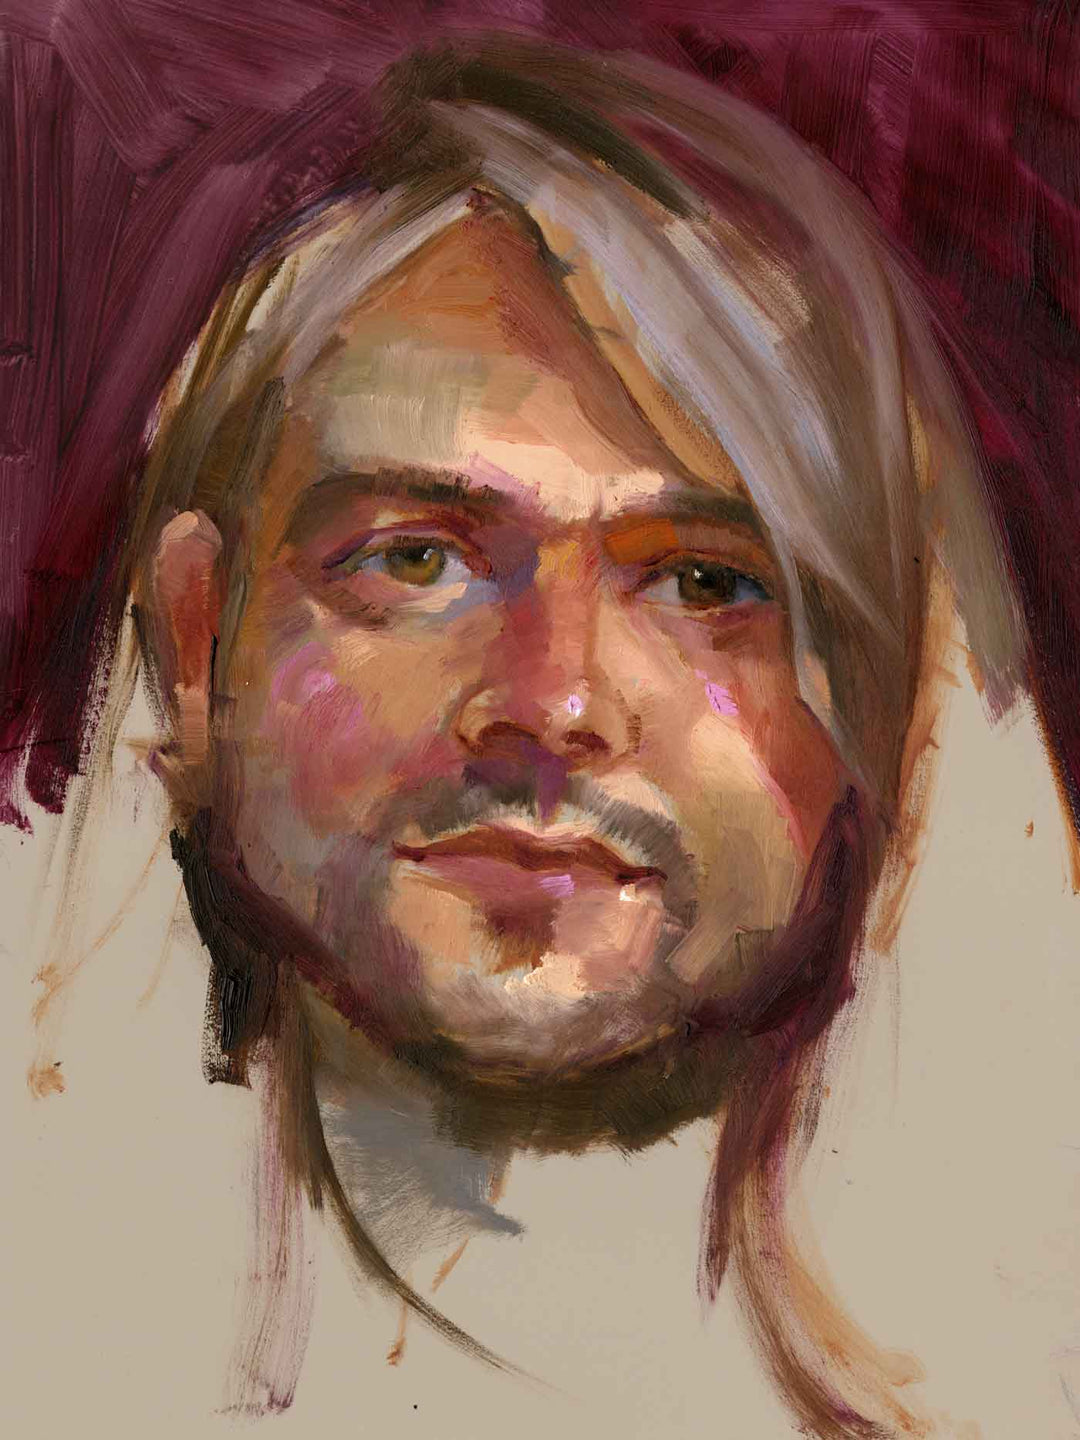 Unfinished portrait painting of a young man with long hair byTalya Johnson